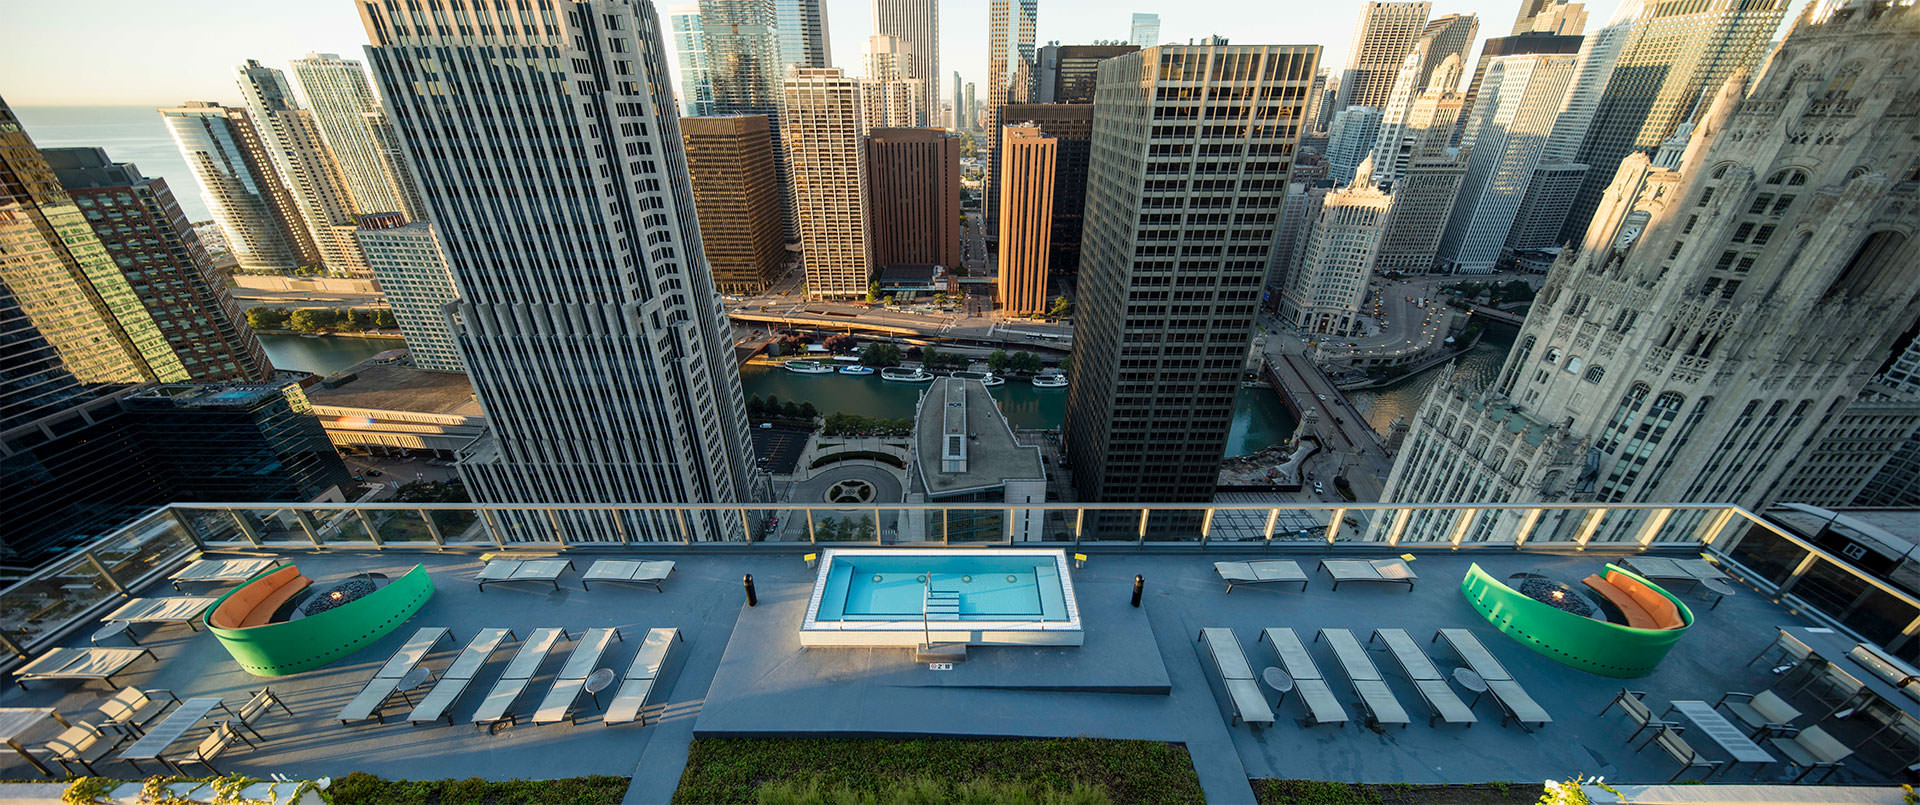 A bird's eye view of the patio shows that it overlooks many Chicago skyscrapers and the Chicago River.